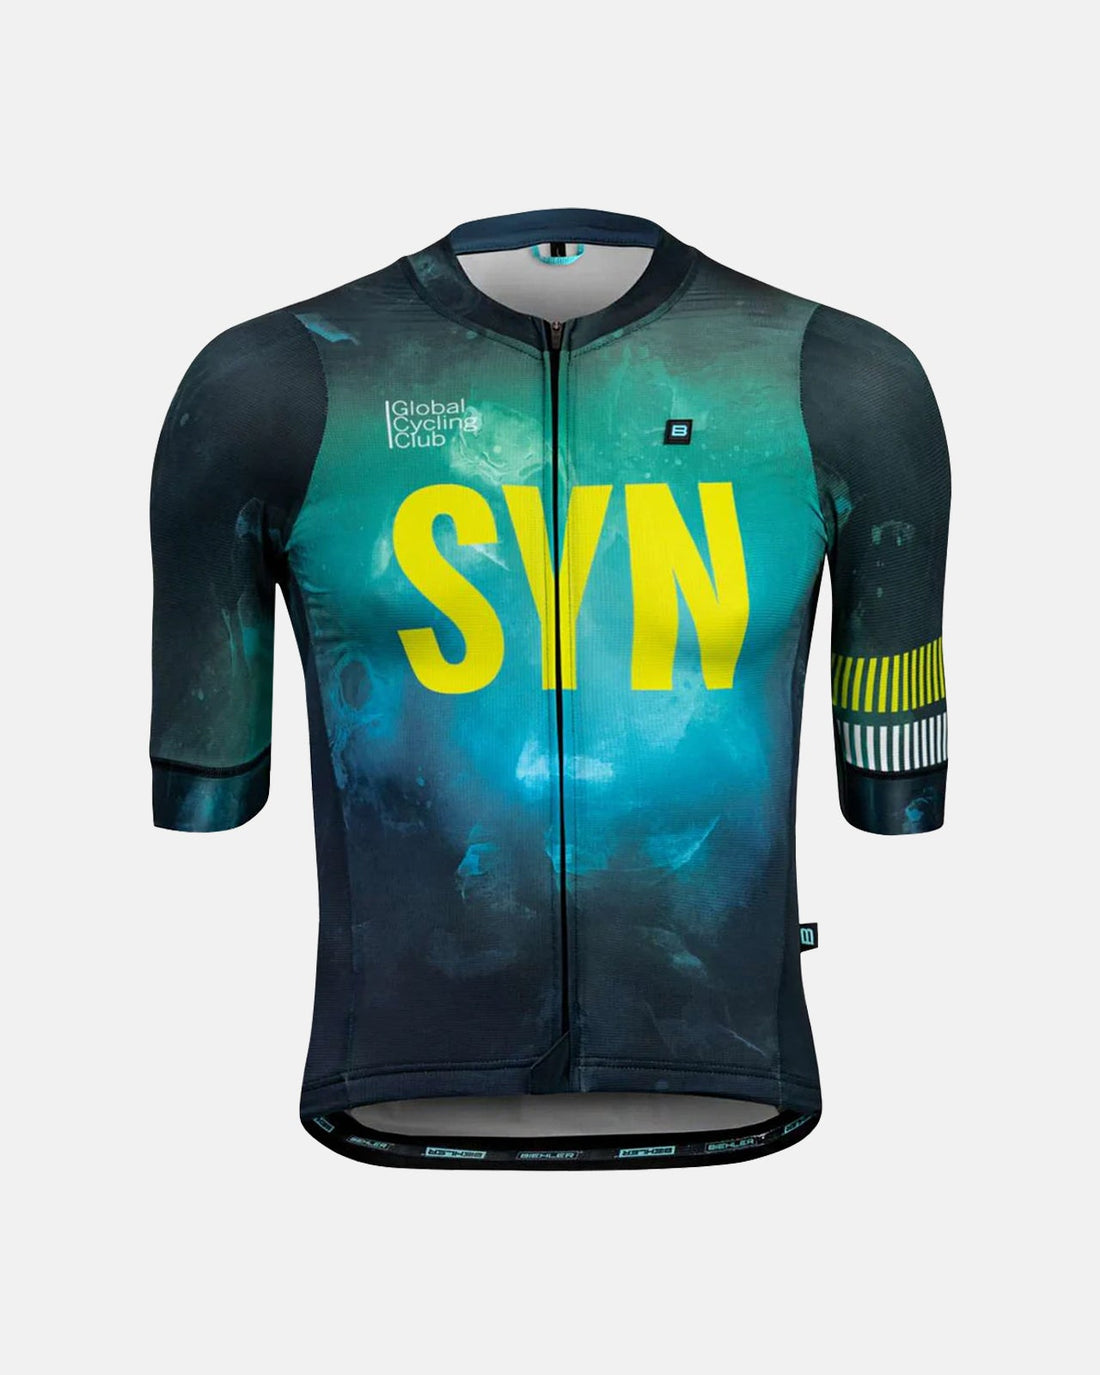 Biehler Syndicate Climber Jersey - Neon Space